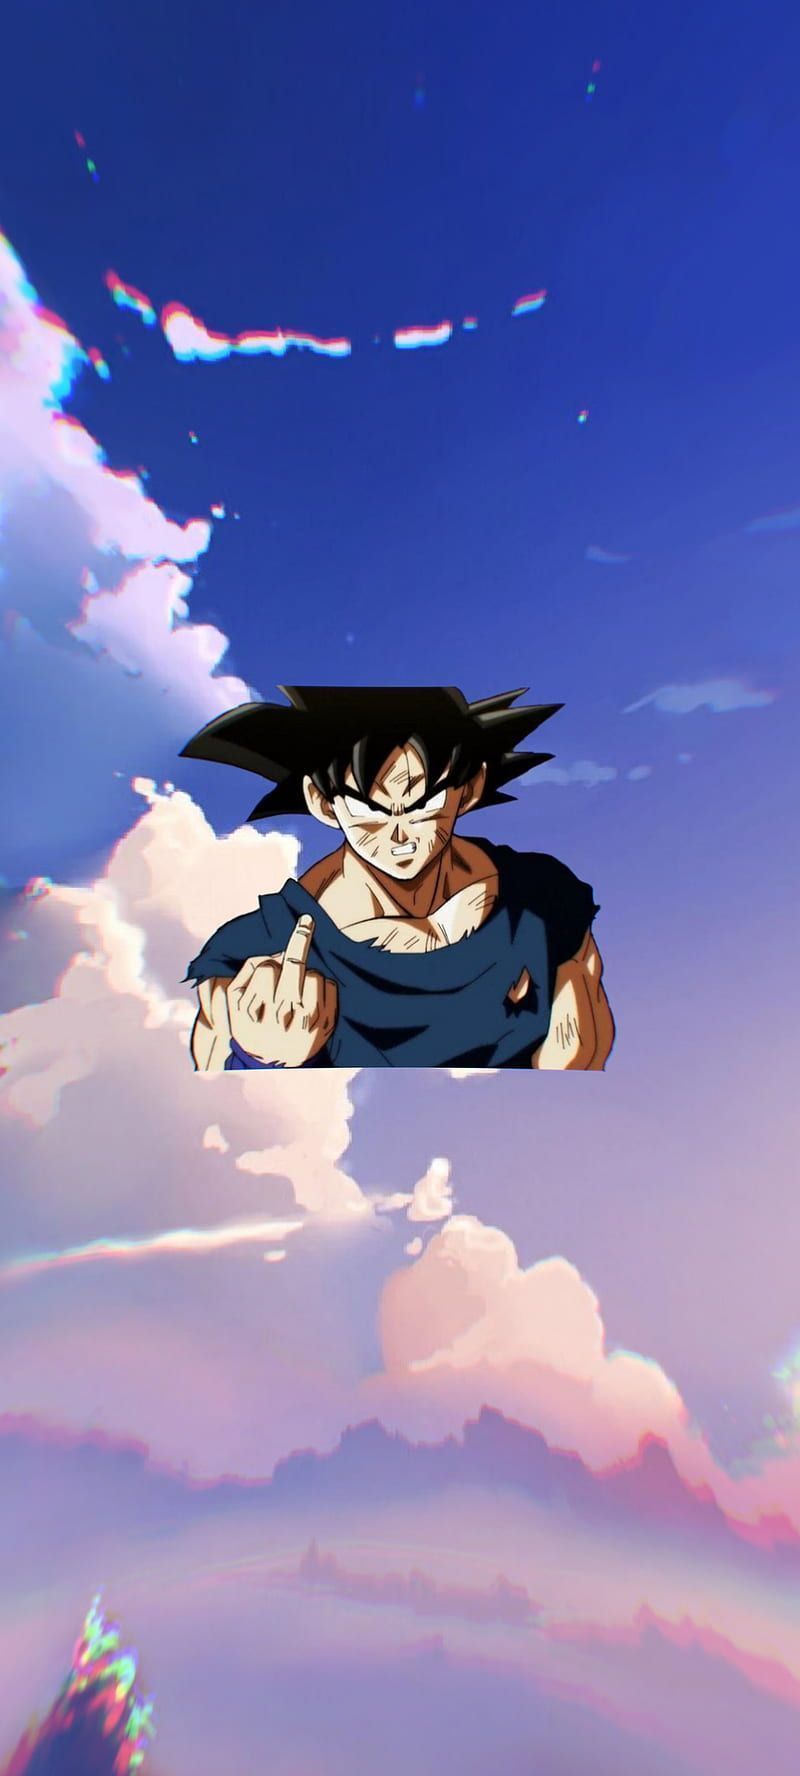 A man with black hair is in the sky - Dragon Ball, Goku